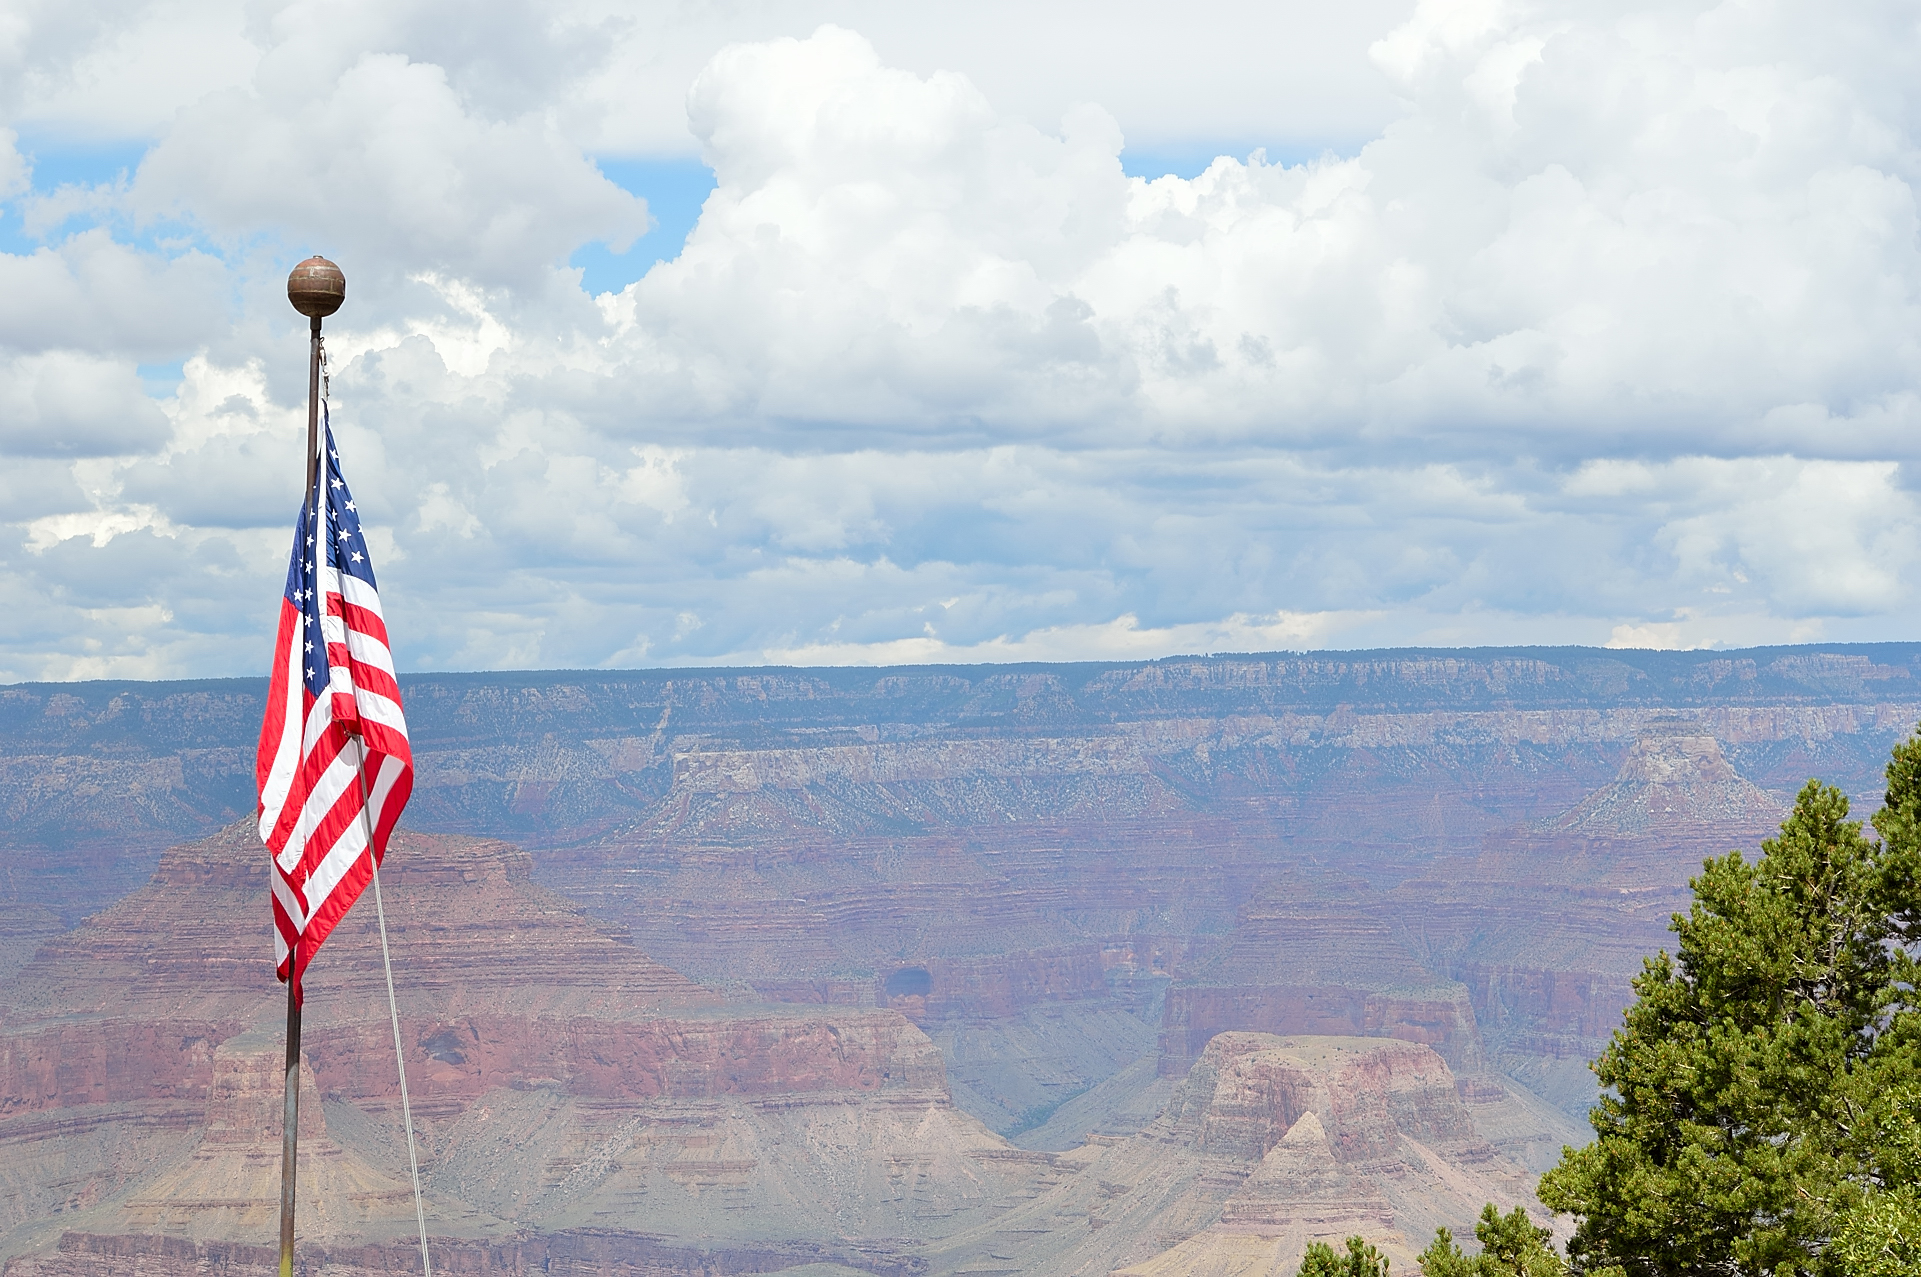 6 easy steps to plan a trip to the USA you’ve been dreaming of